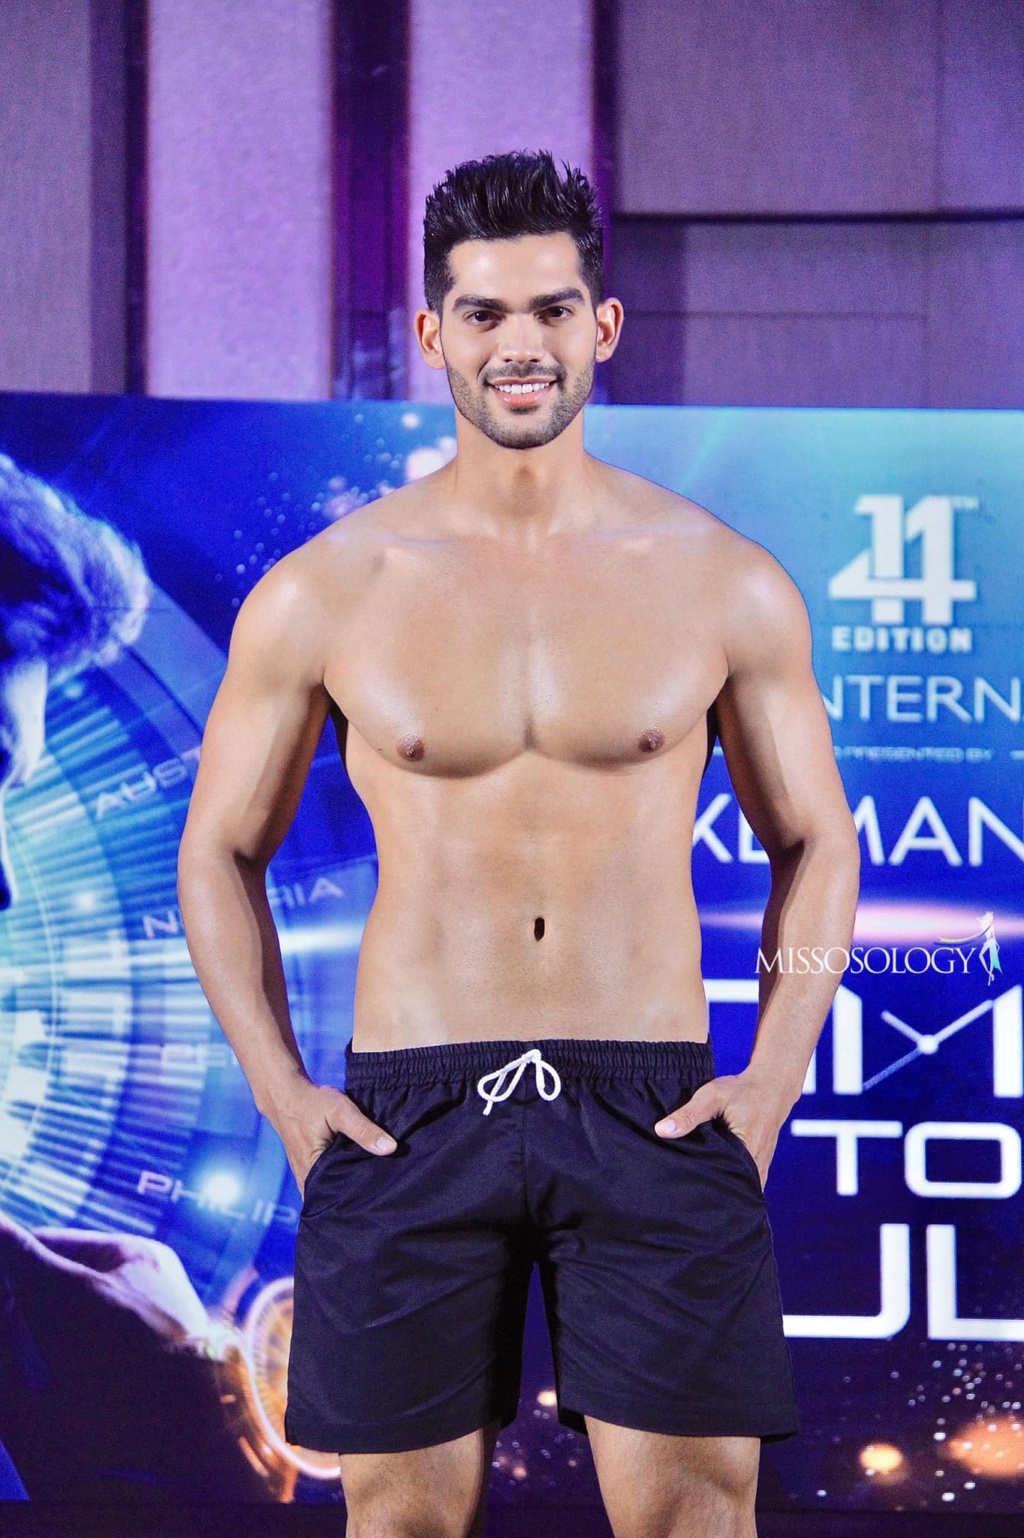 14th Mister International in Manila, Philippines - Oct 30th, 2022 - Winner is Dominican Republic 31280312